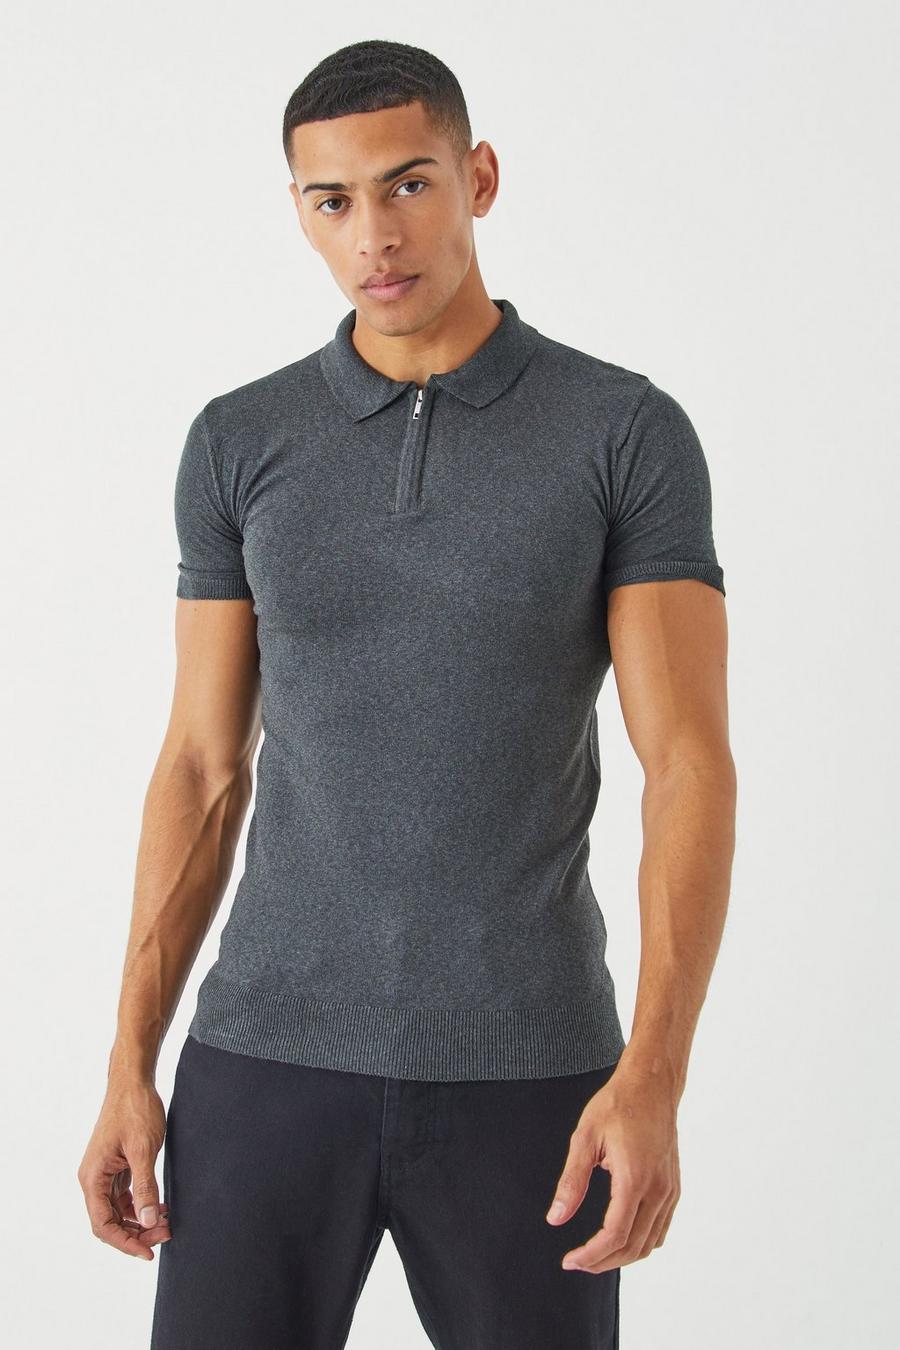 Charcoal Muscle Fit Short Sleeve Half Zip Polo